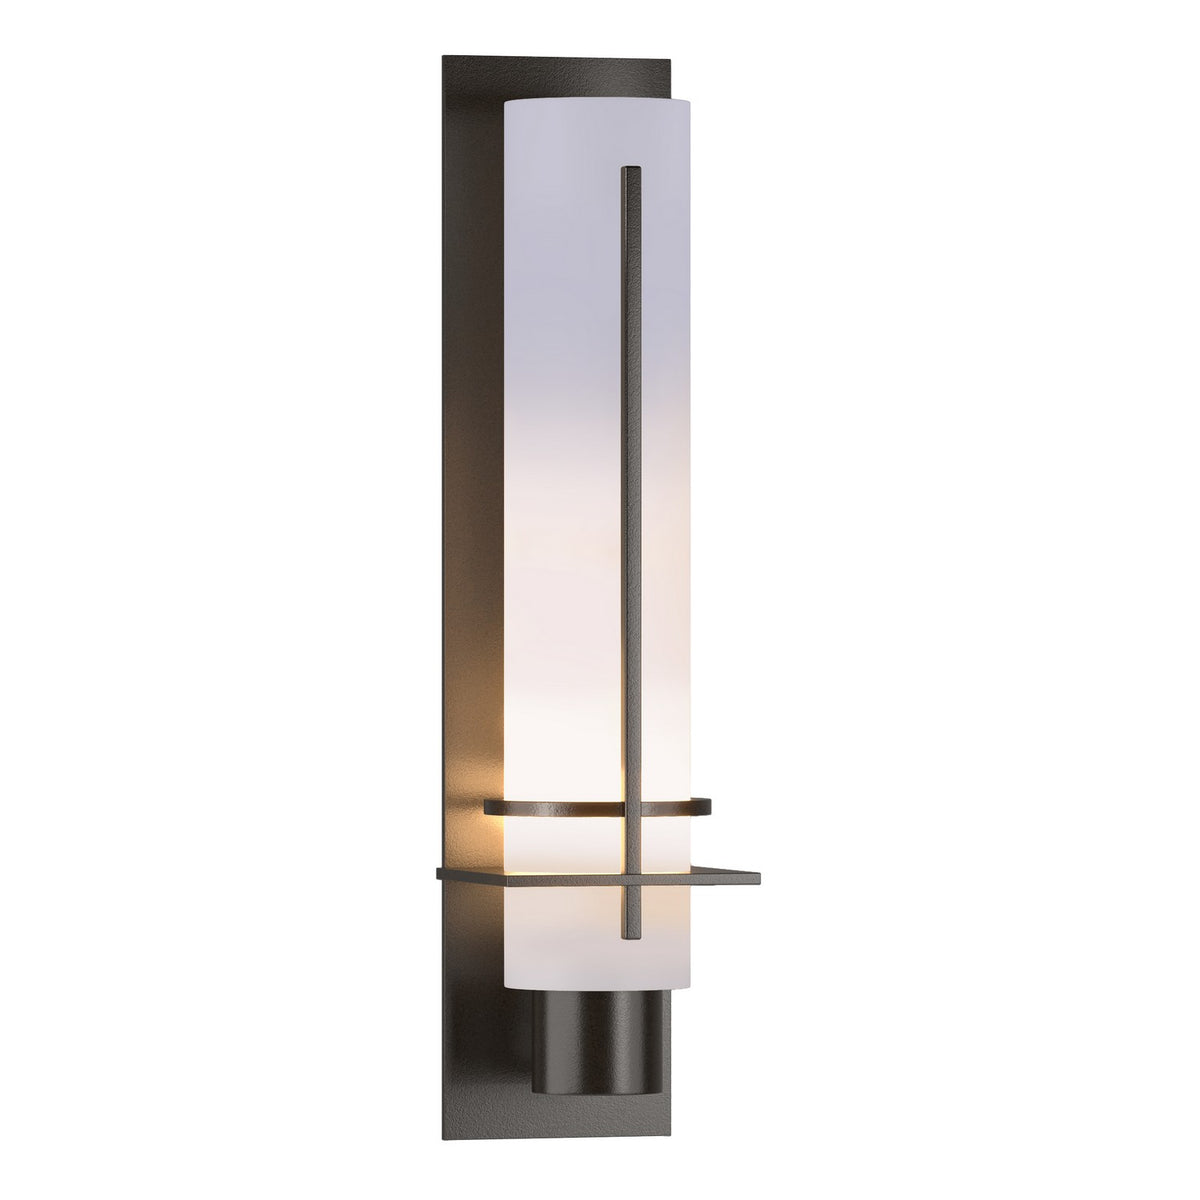 Hubbardton Forge - 207858-SKT-14-GG0173 - One Light Wall Sconce - After Hours - Oil Rubbed Bronze